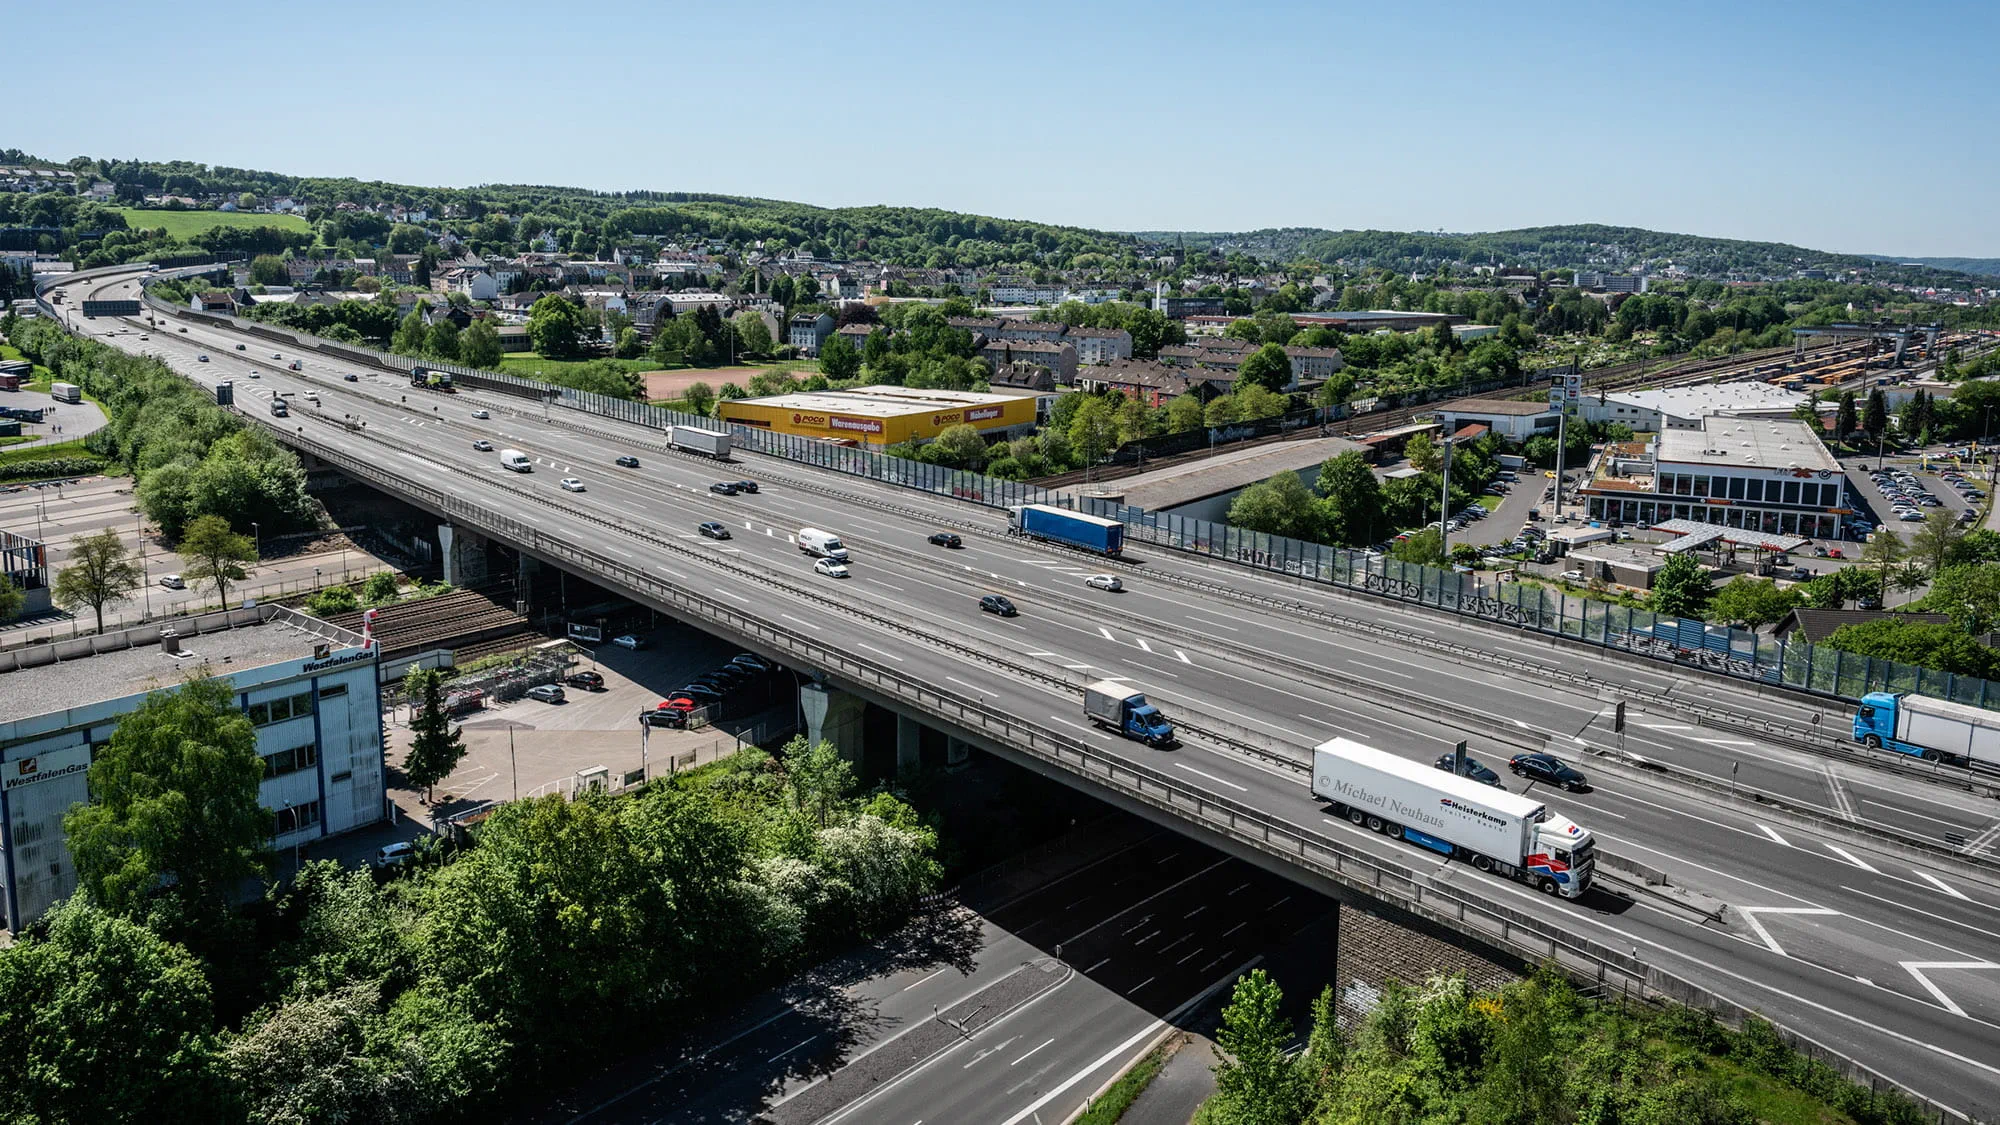 The 6-lane Schwelmetal bridge near Wuppertal is part of the A1 one of the busiest motorways in Germany. It must be replaced without obstructing the flow of traffic. 